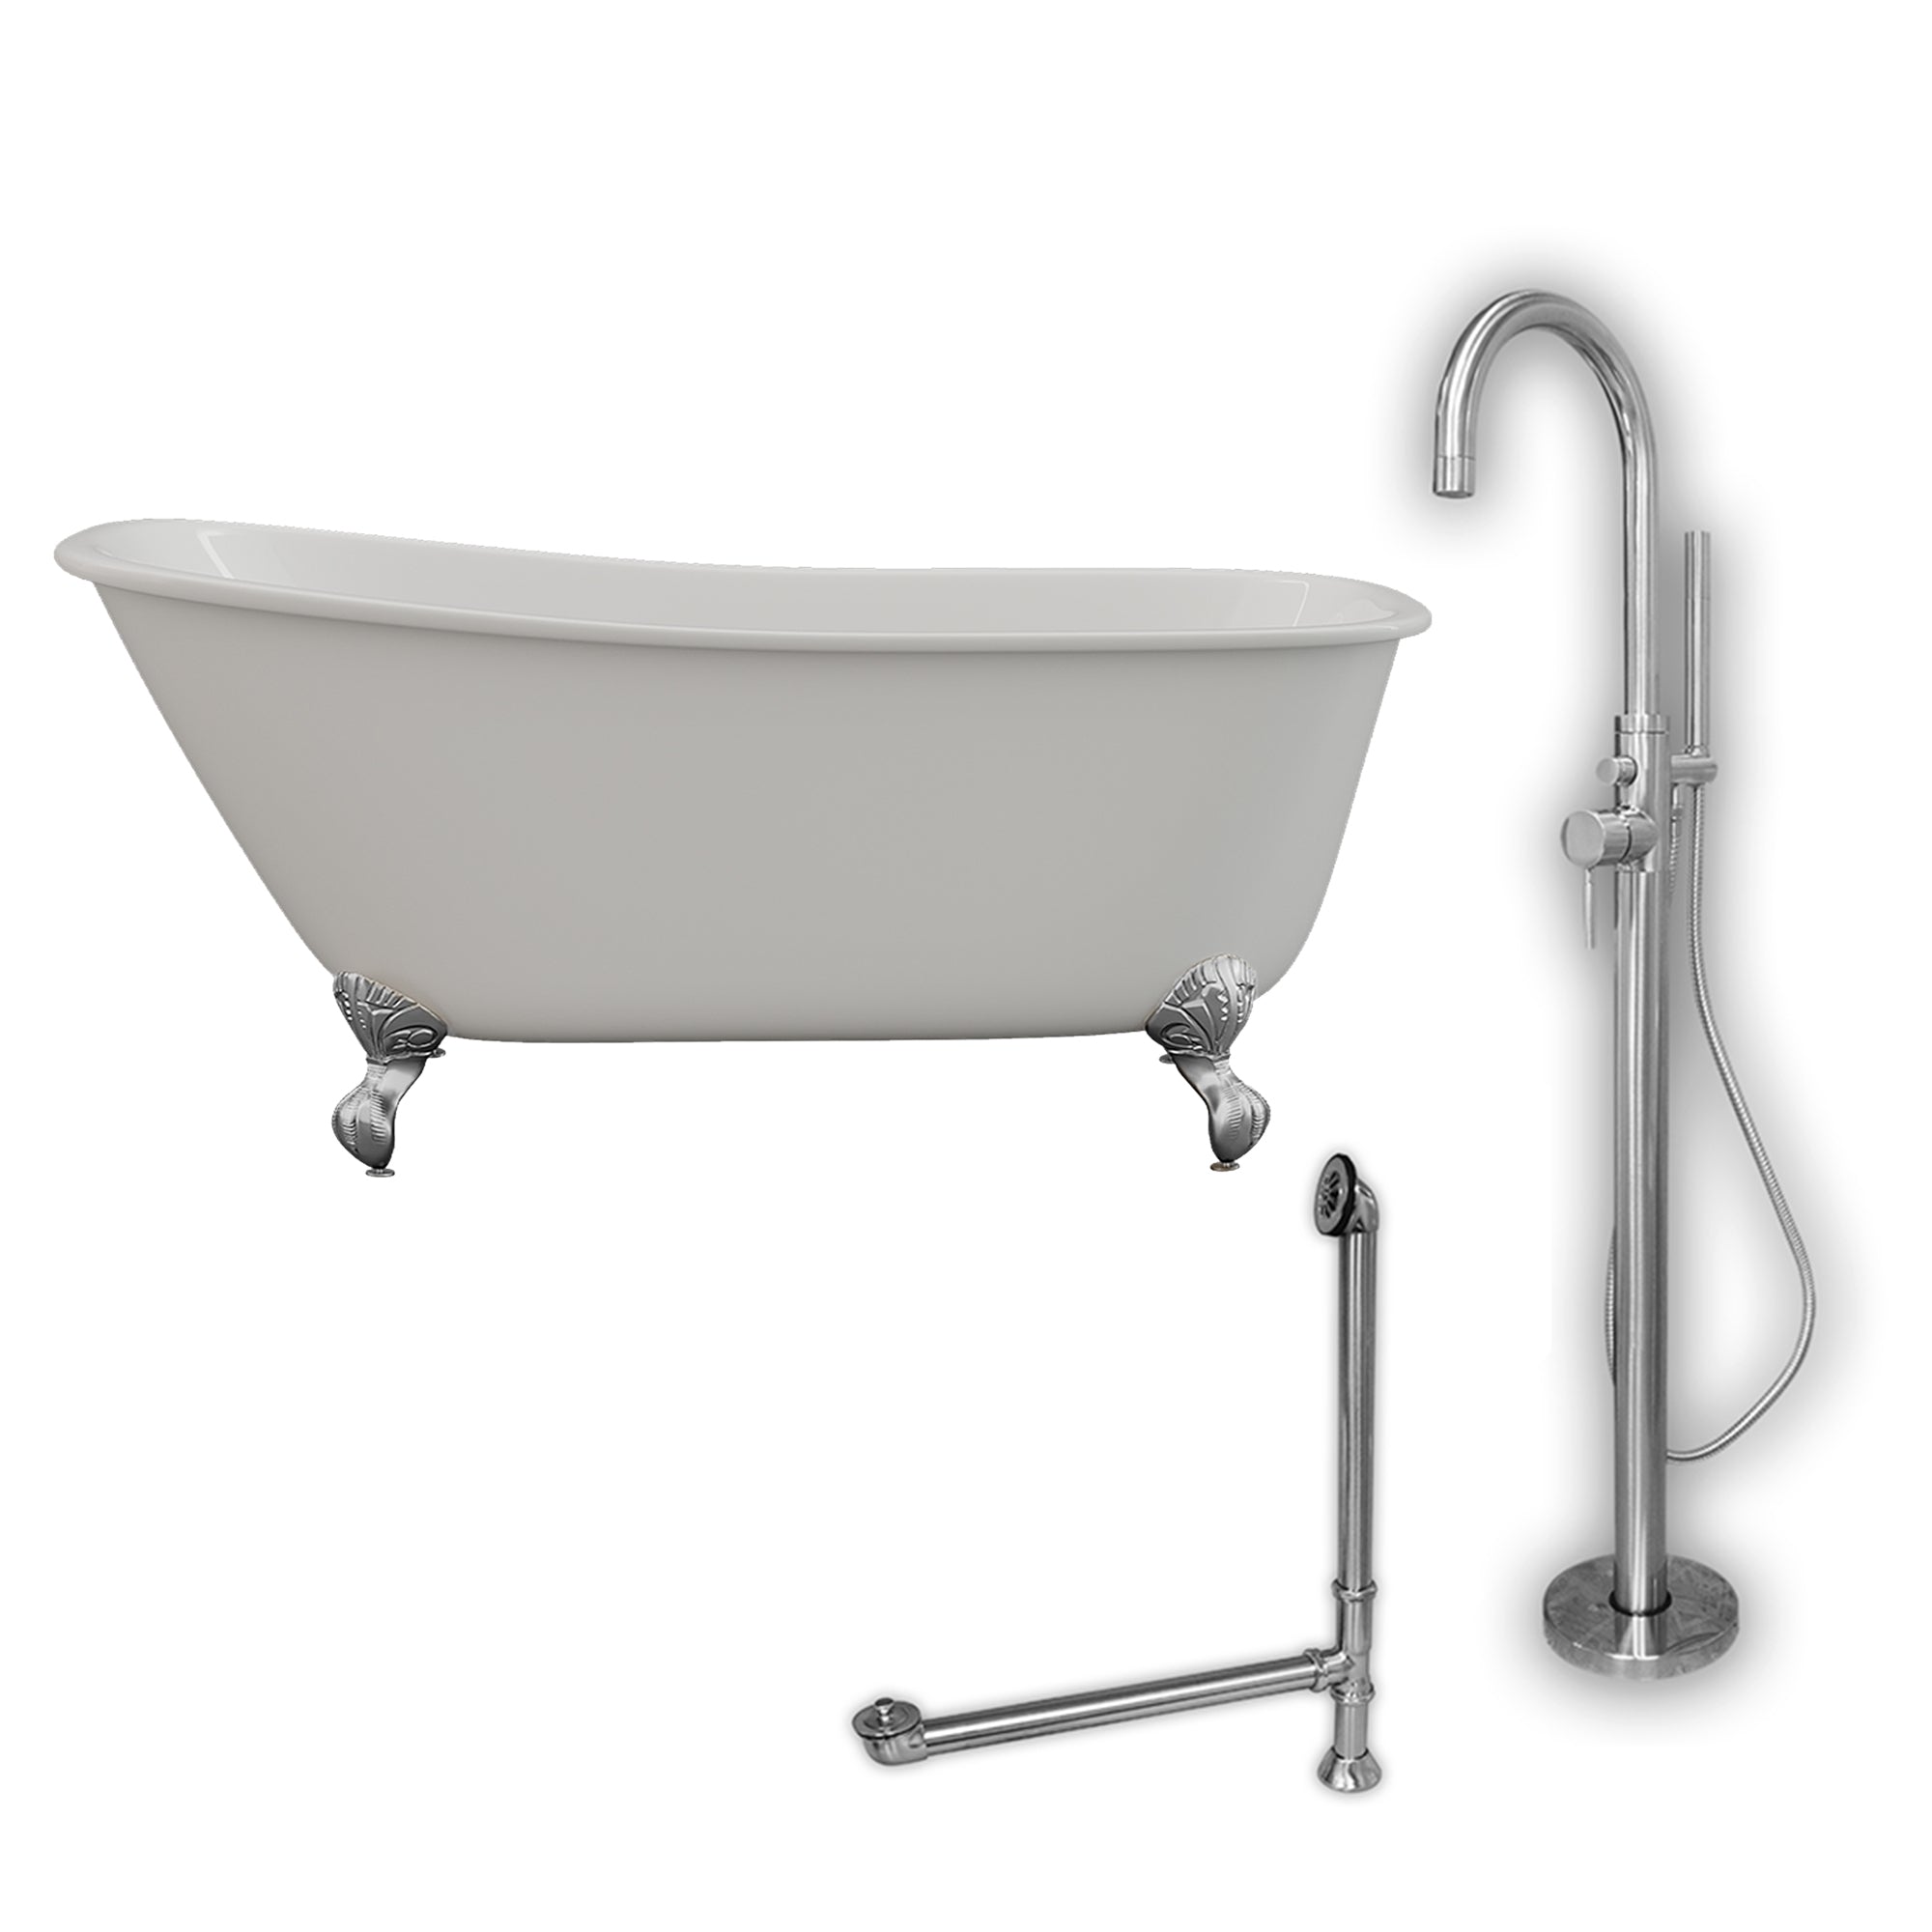 Cambridge Plumbing 58-Inch Swedish Slipper Cast Iron Clawfoot Tub (Porcelain enamel interior and white paint exterior) with Freestanding Plumbing Package (Brushed Nickel) SWED58-150-PKG-NH - Vital Hydrotherapy